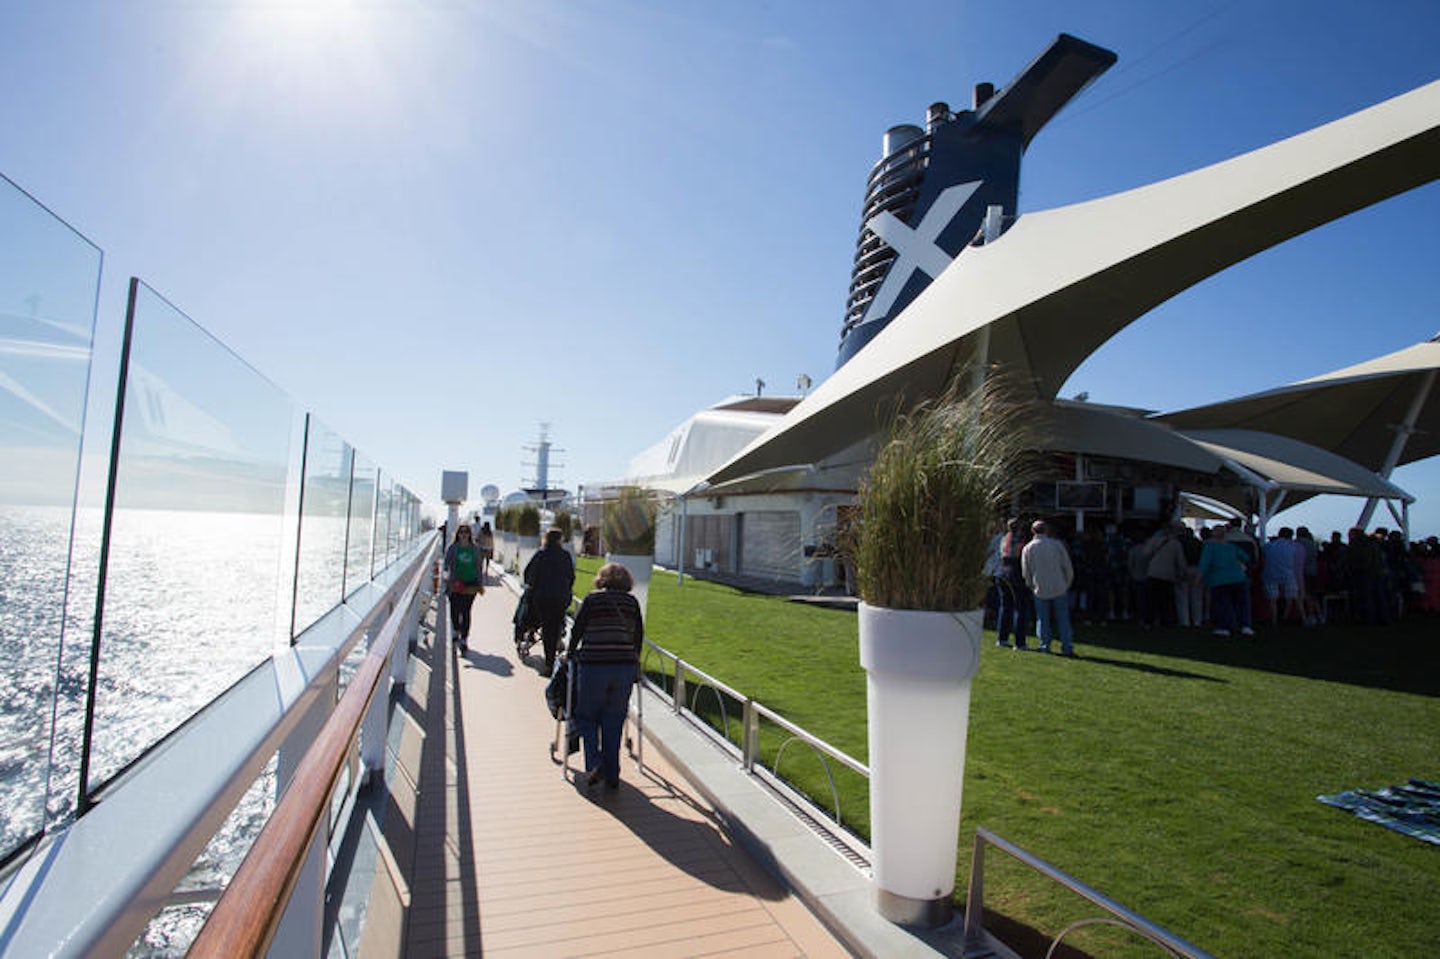 The Lawn Club on Celebrity Solstice